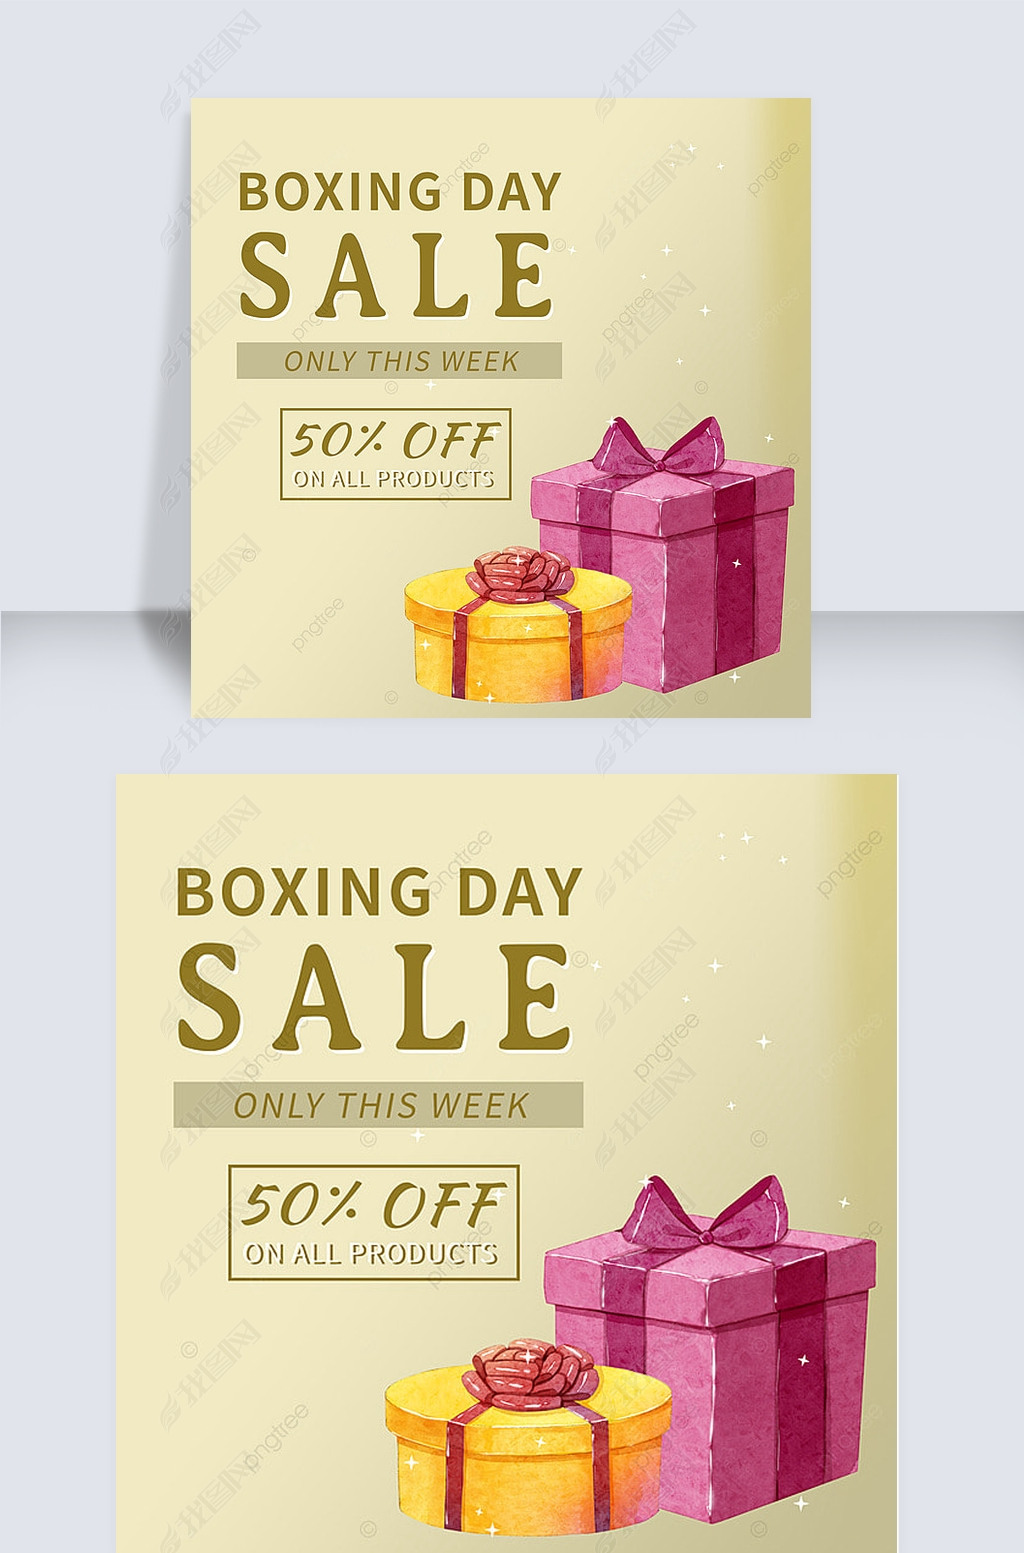 boxing day ordinary watercolor gift boxes discount instagram post